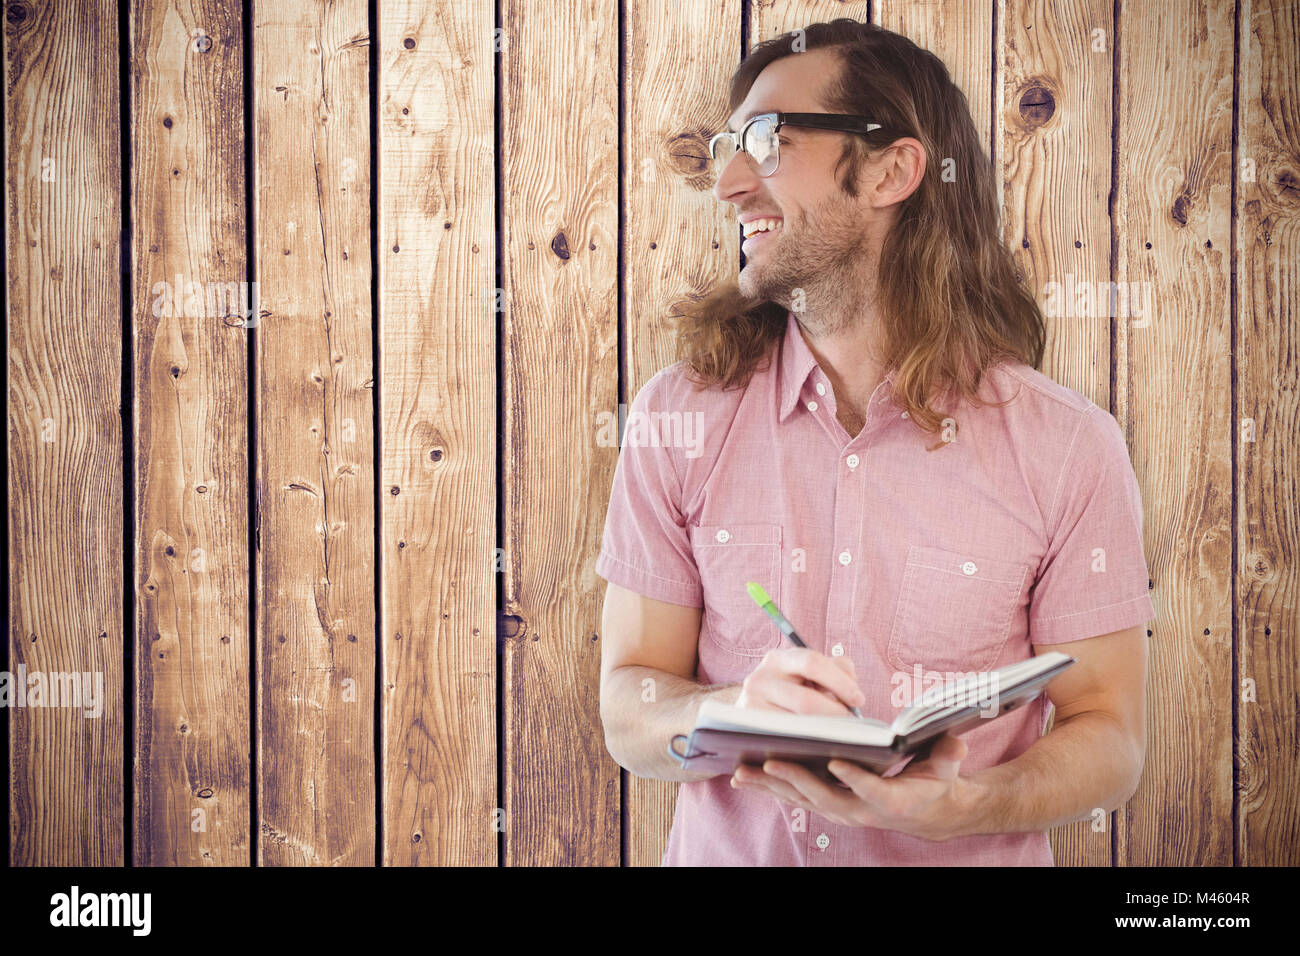 Composite image of happy hipster holding book and pen Stock Photo